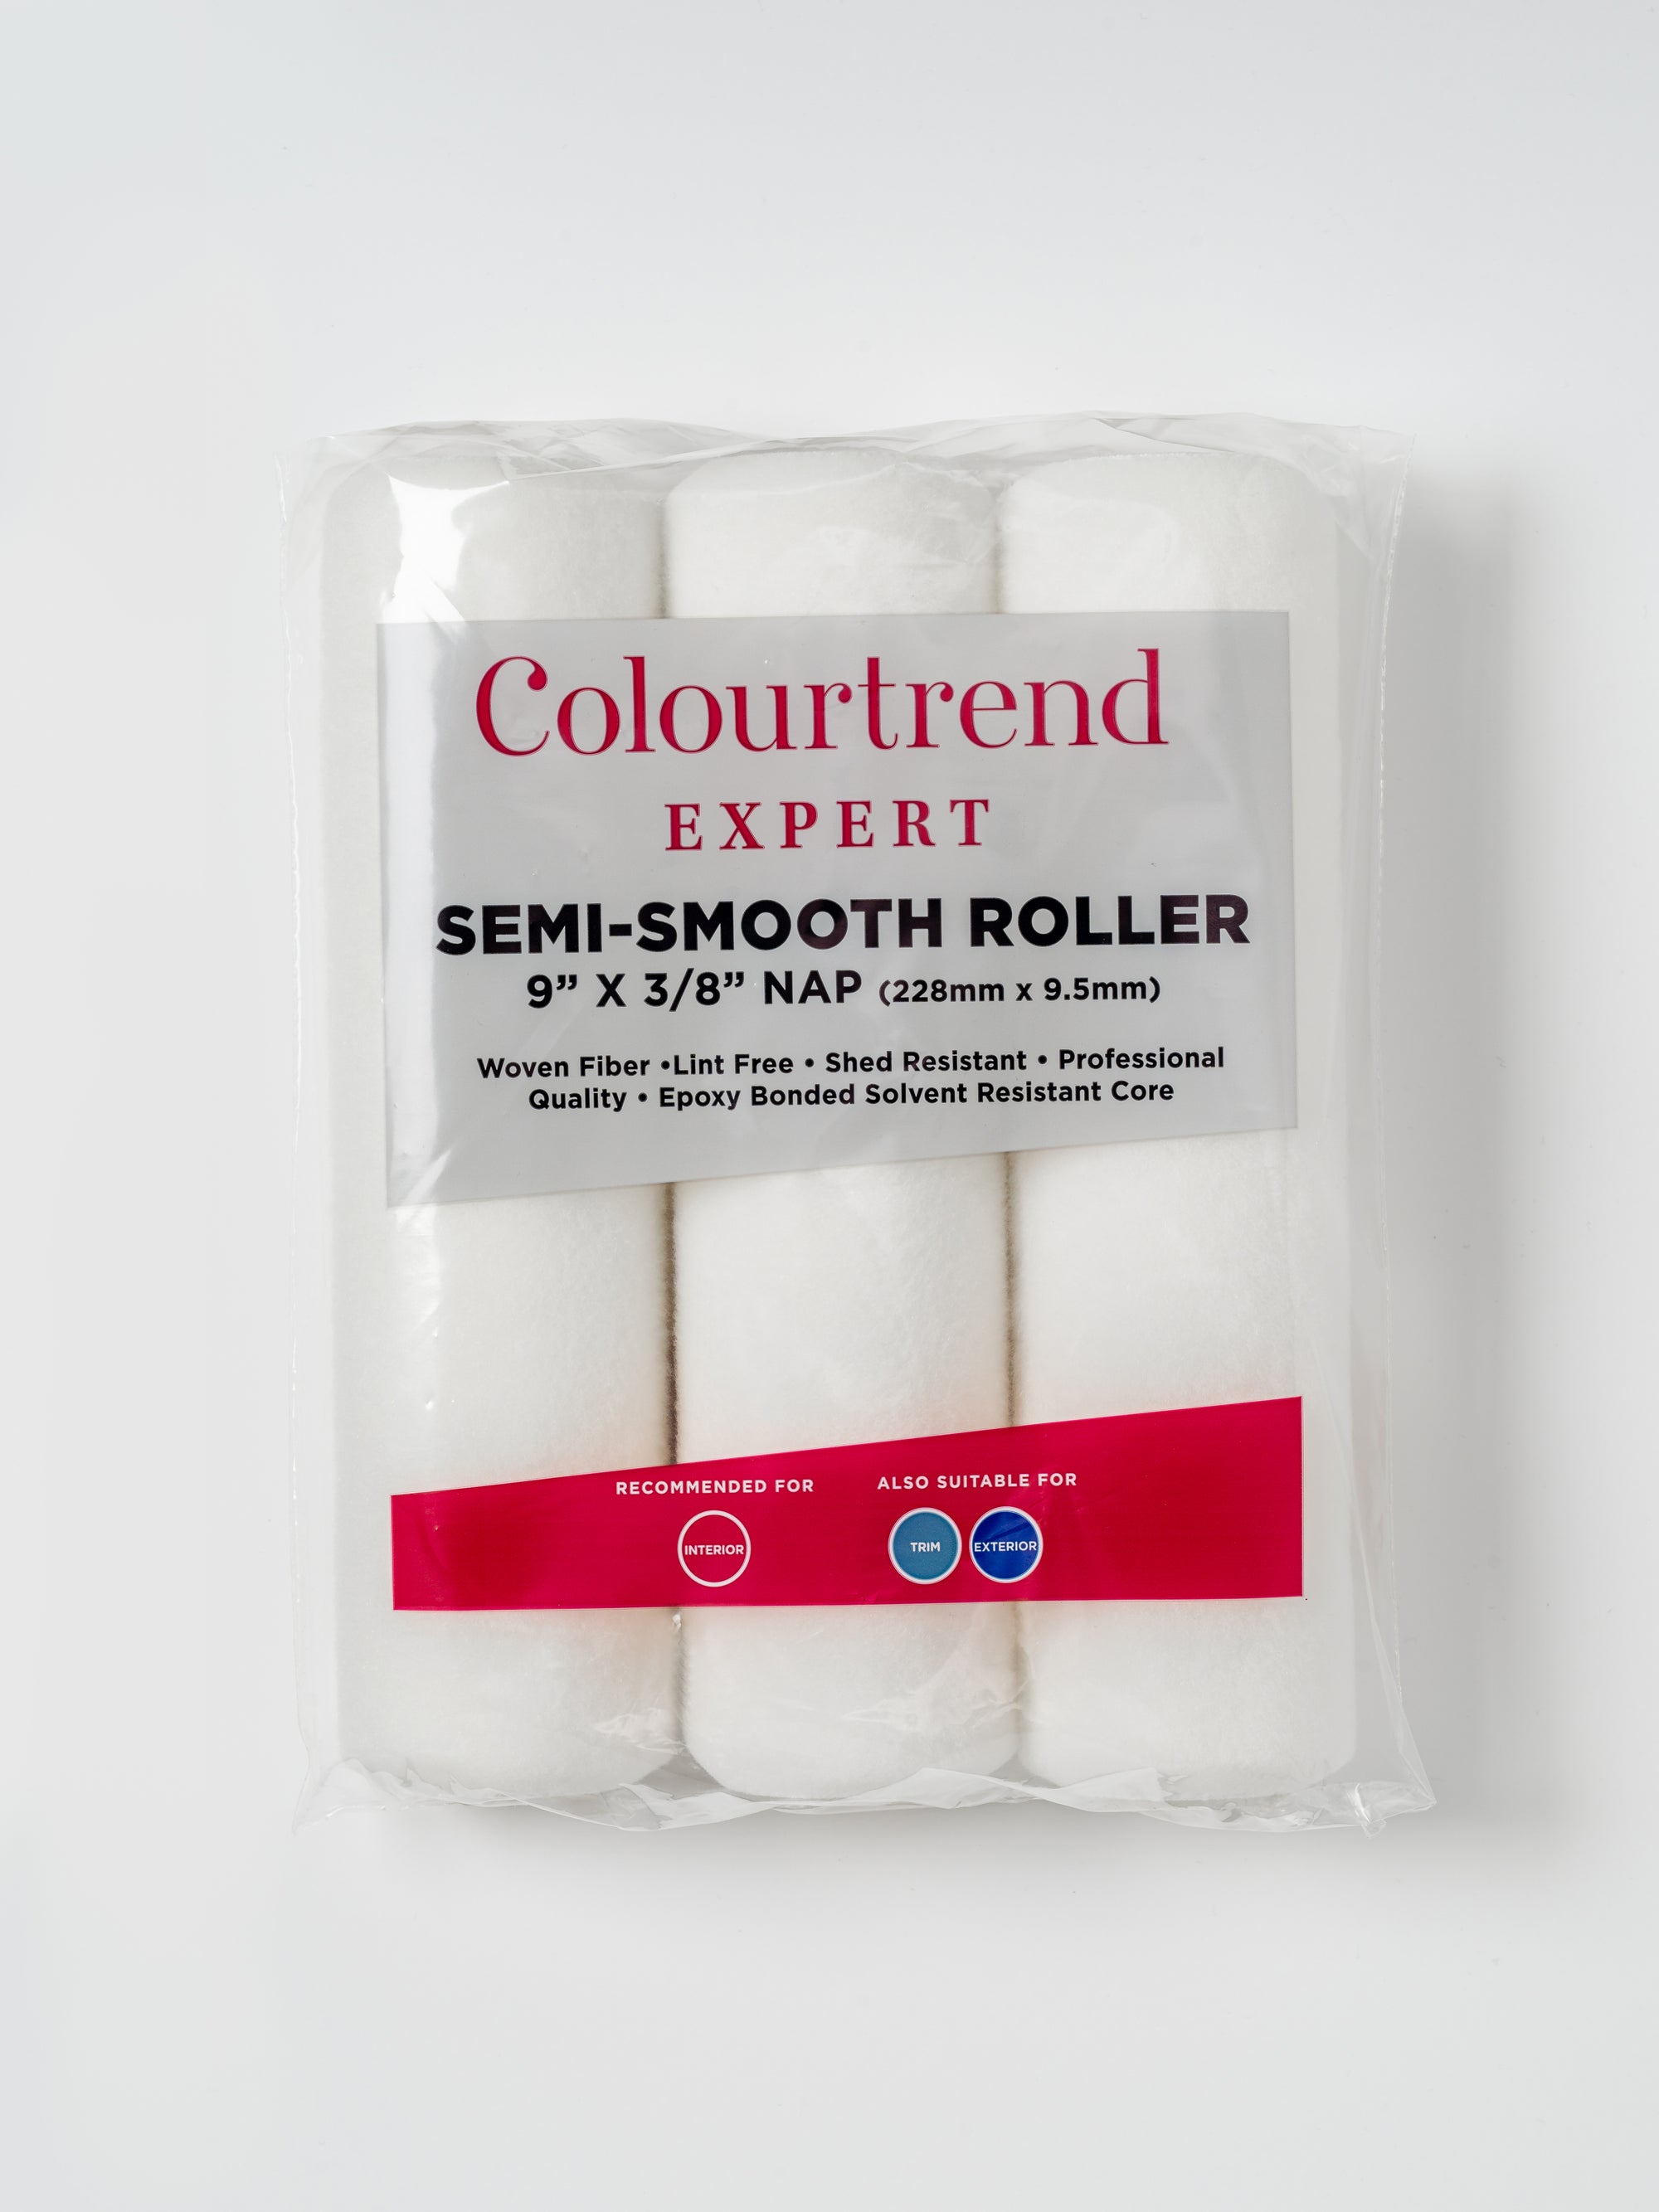 Colourtrend Expert 3-PK 9" X 3/8" Semi-Smooth Roller